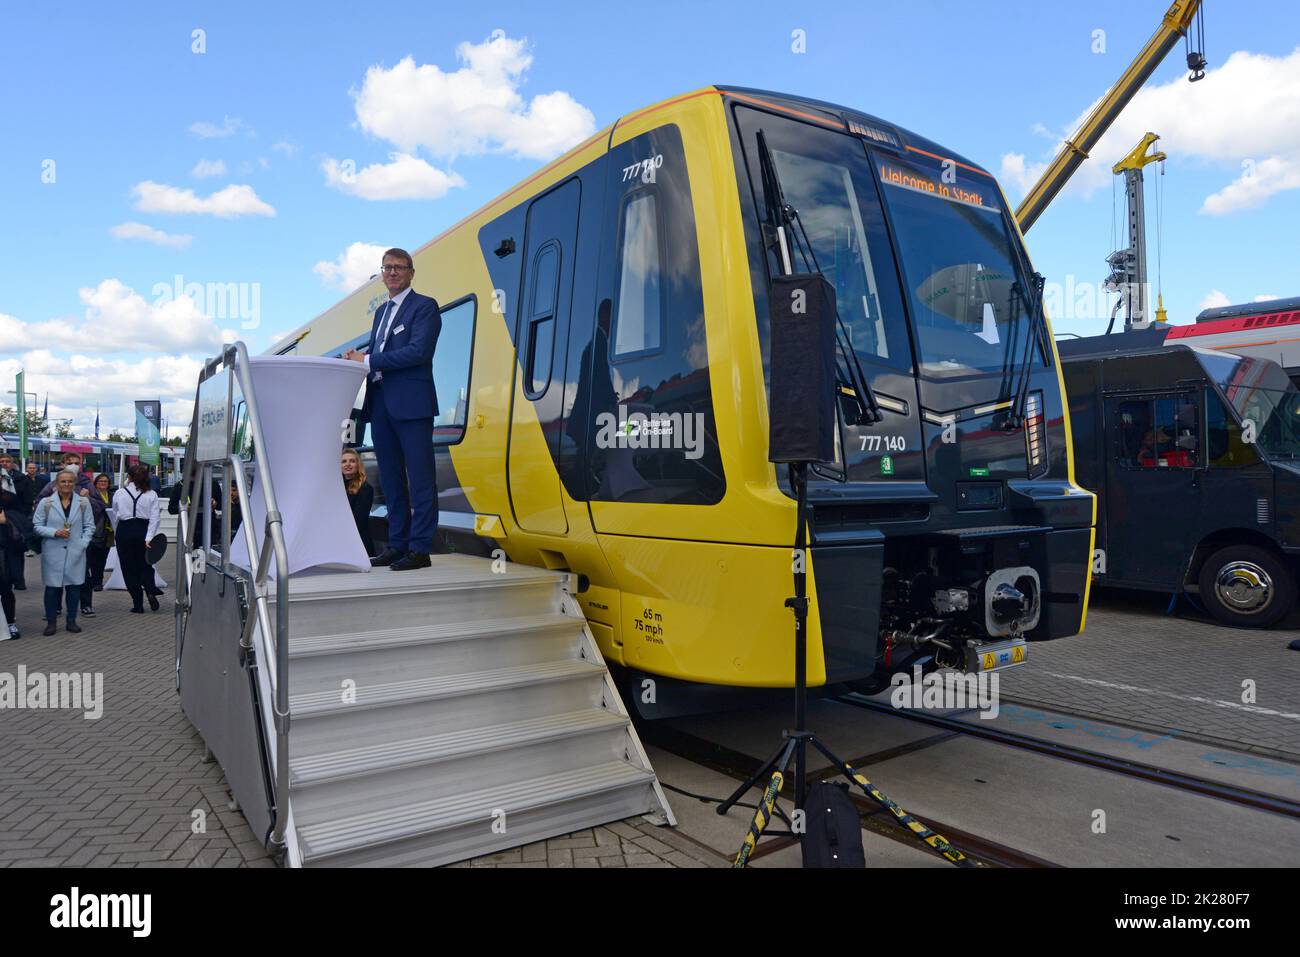 Berlin, Germany, 22nd September 2022. Train manufacturer Stadler has officially unveiled its new IPEMU Merseytravel Class 777 train with Metro Mayor for the Liverpool City Region Steve Rotheram, at Innotrans 2022, the international transport exhibition. The mayor, viewing the first train of the 52 strong fleet, said they had been “bought by the public for the public, putting the ‘public’ back into public transport”. He also said that the services will be integrated with the city’s buses and ferries. Although the majority of the fleet will be just 3rd rail powered, 7 will have battery packs to Stock Photo